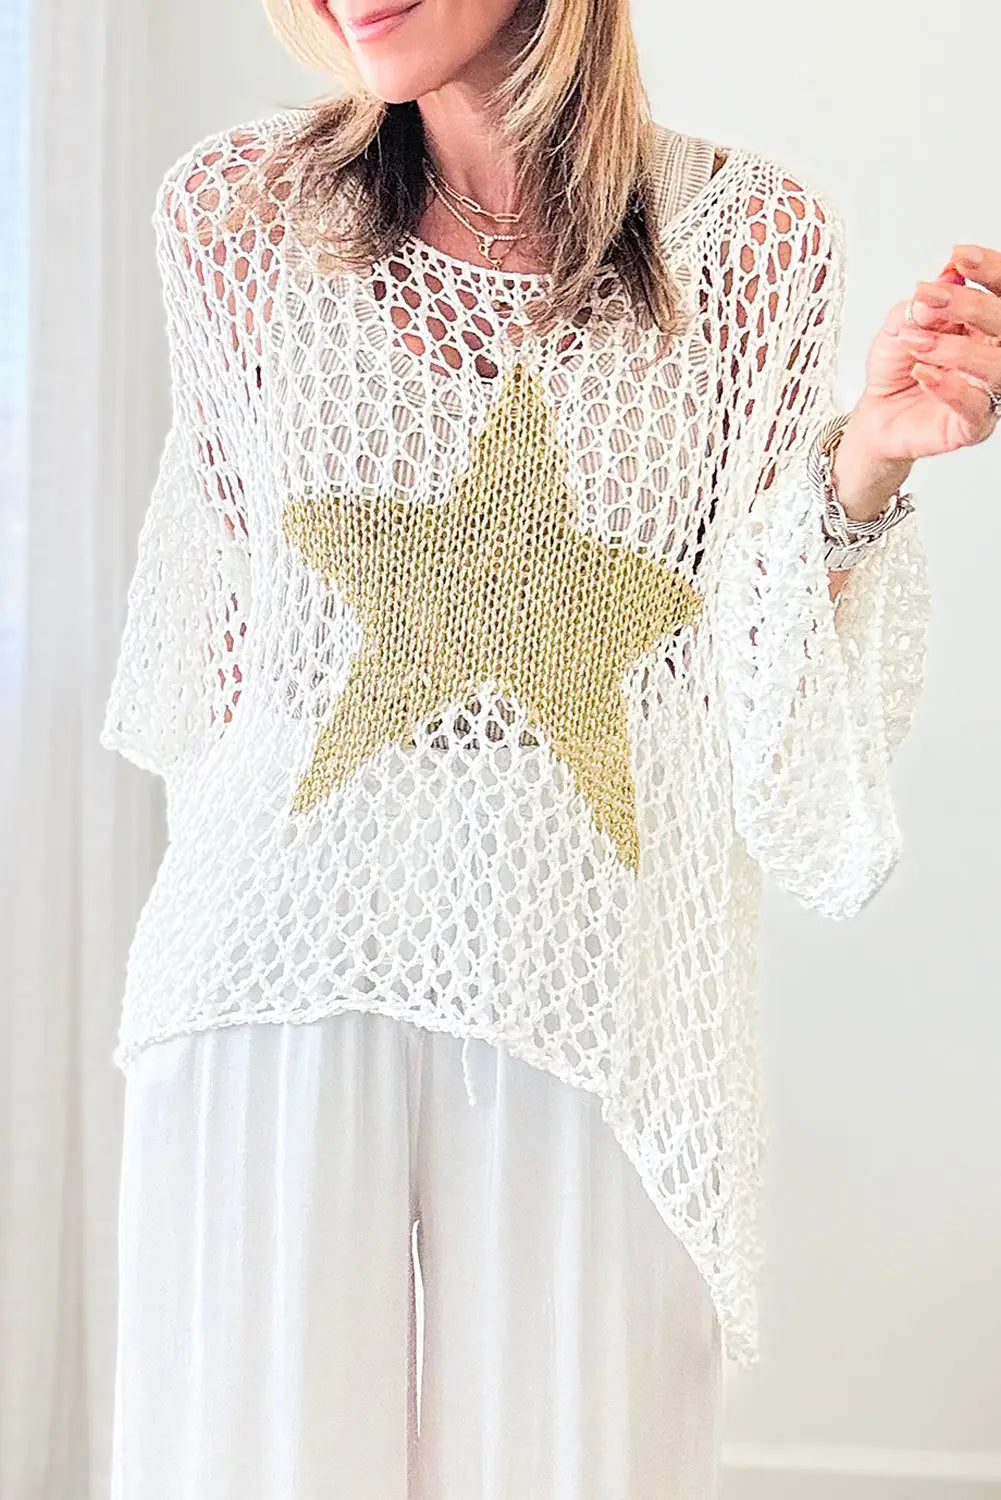 White star graphic crochet summer top - s / 100% acrylic - tops/tops & tees